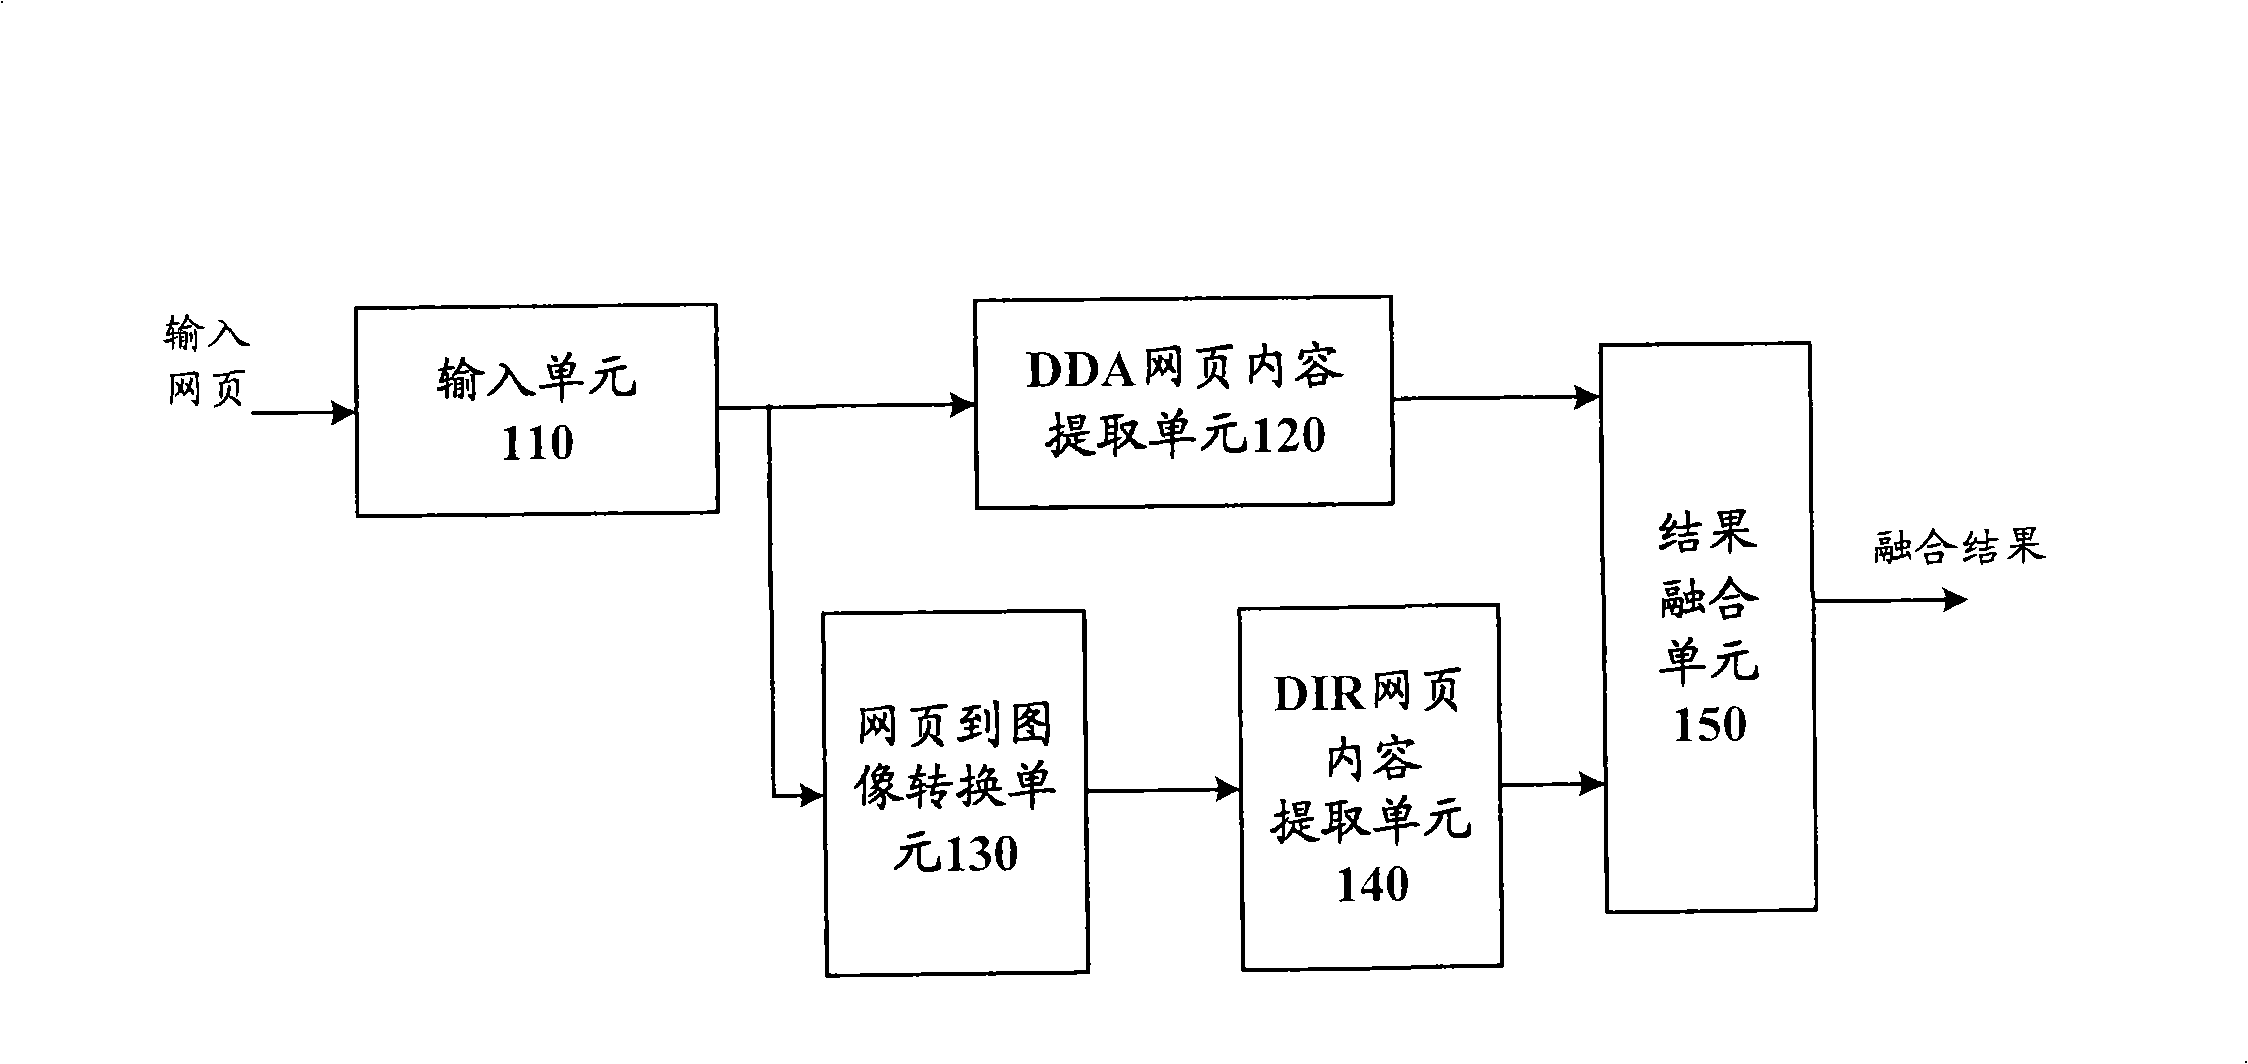 Method and device for extracting webpage content